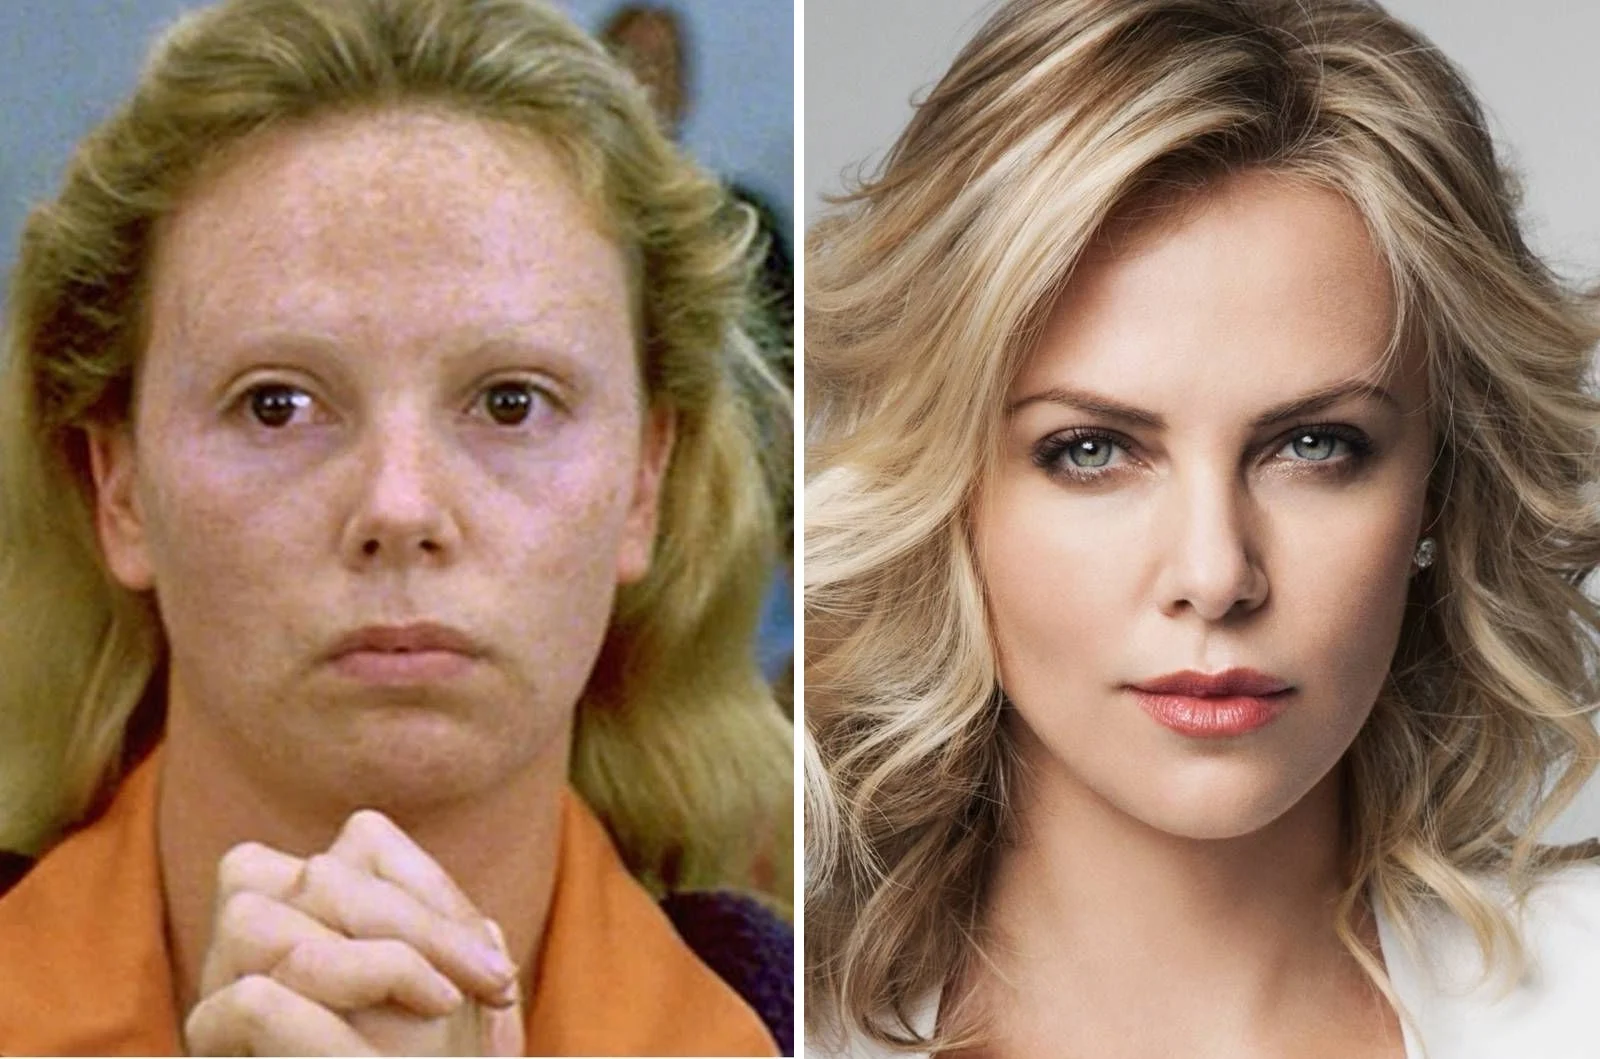 Aileen Wuornos – Charlize Theron